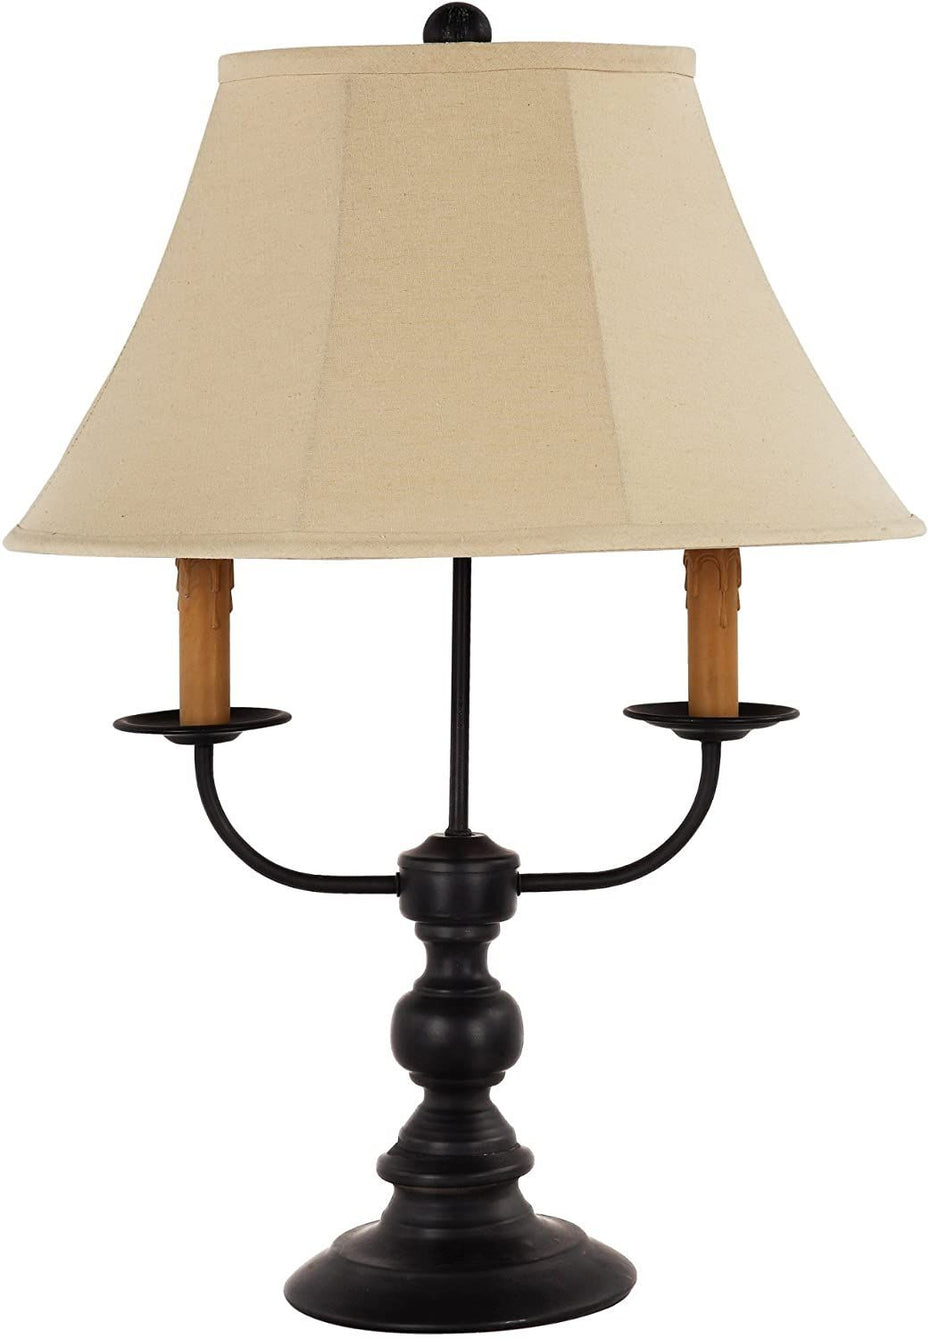 Three Light Standard Table Lamp With White Shade - Black - Metal